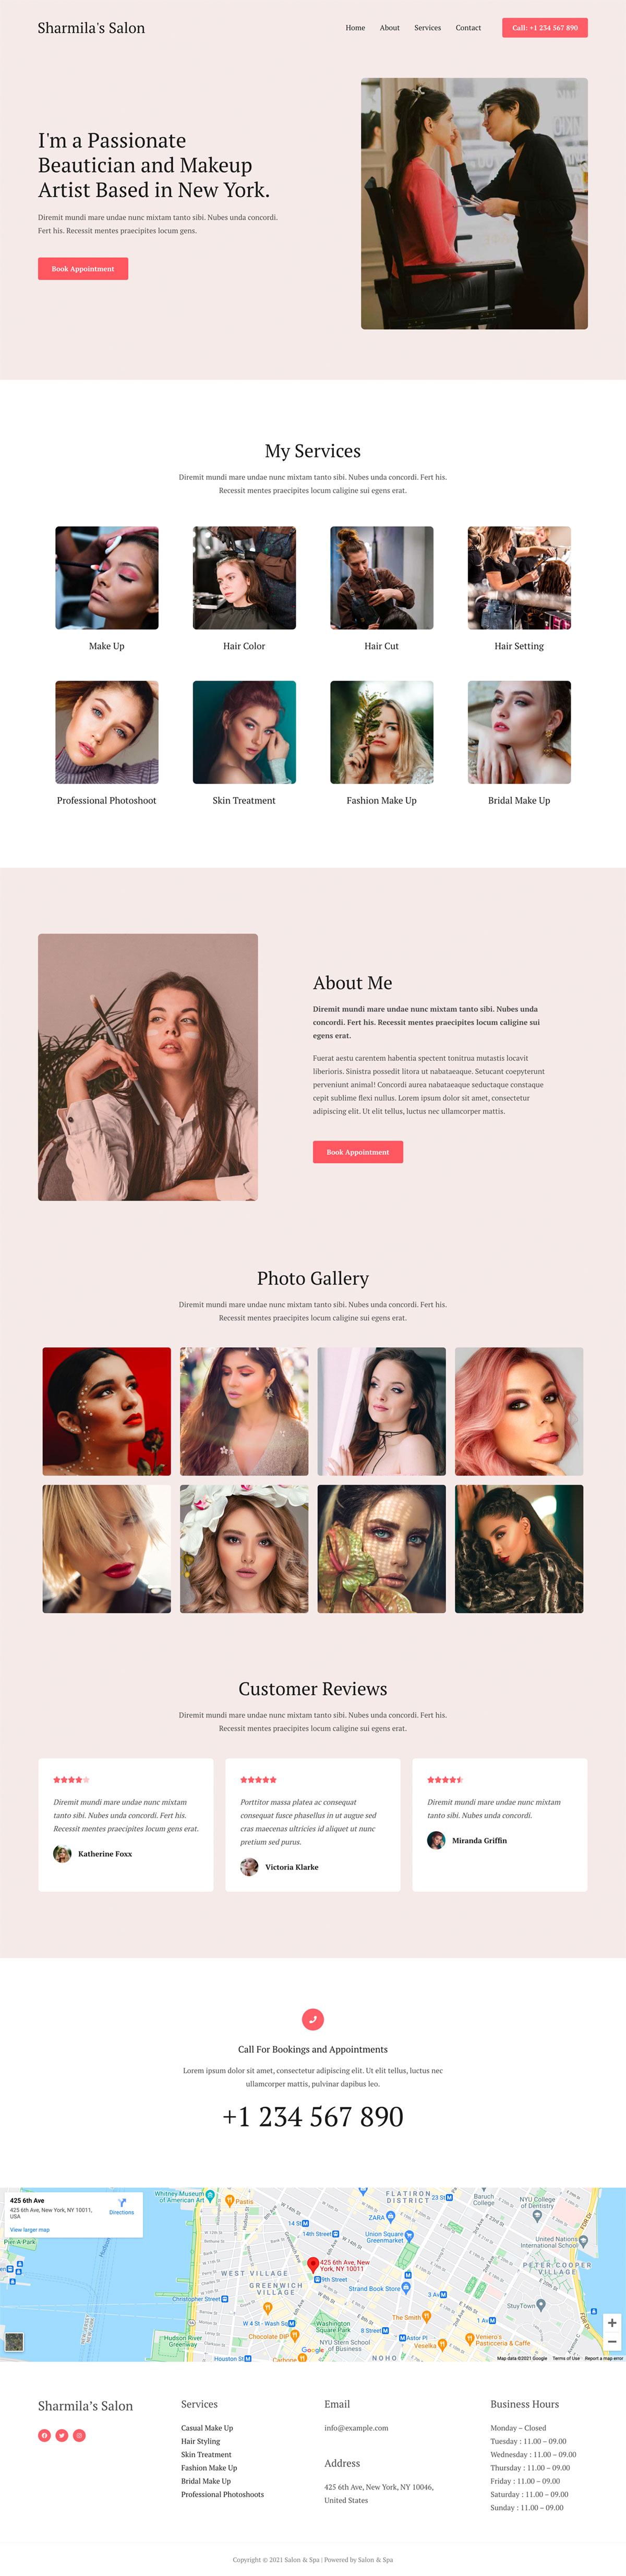 6+ FREE Salon Website Templates and Designs